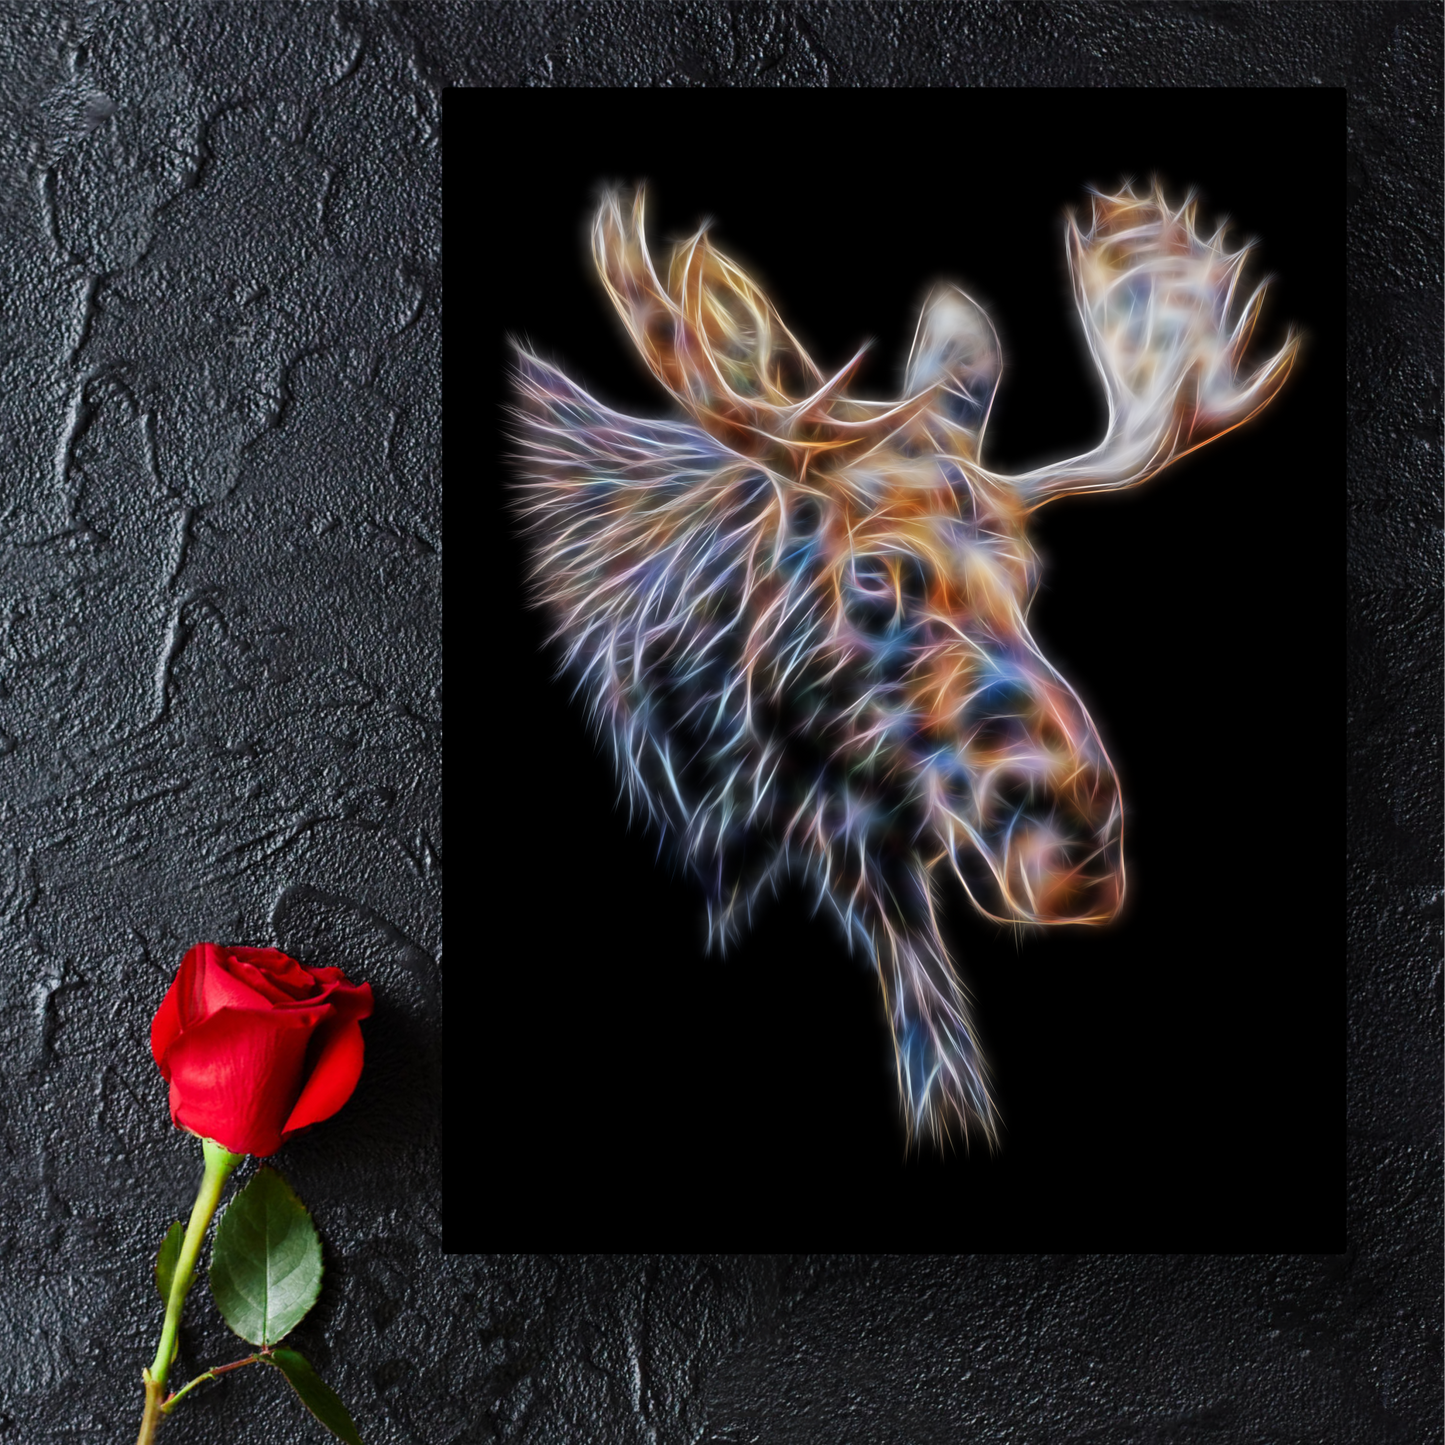 Bull Moose Metal Wall Plaque with Stunning Fractal Art Design